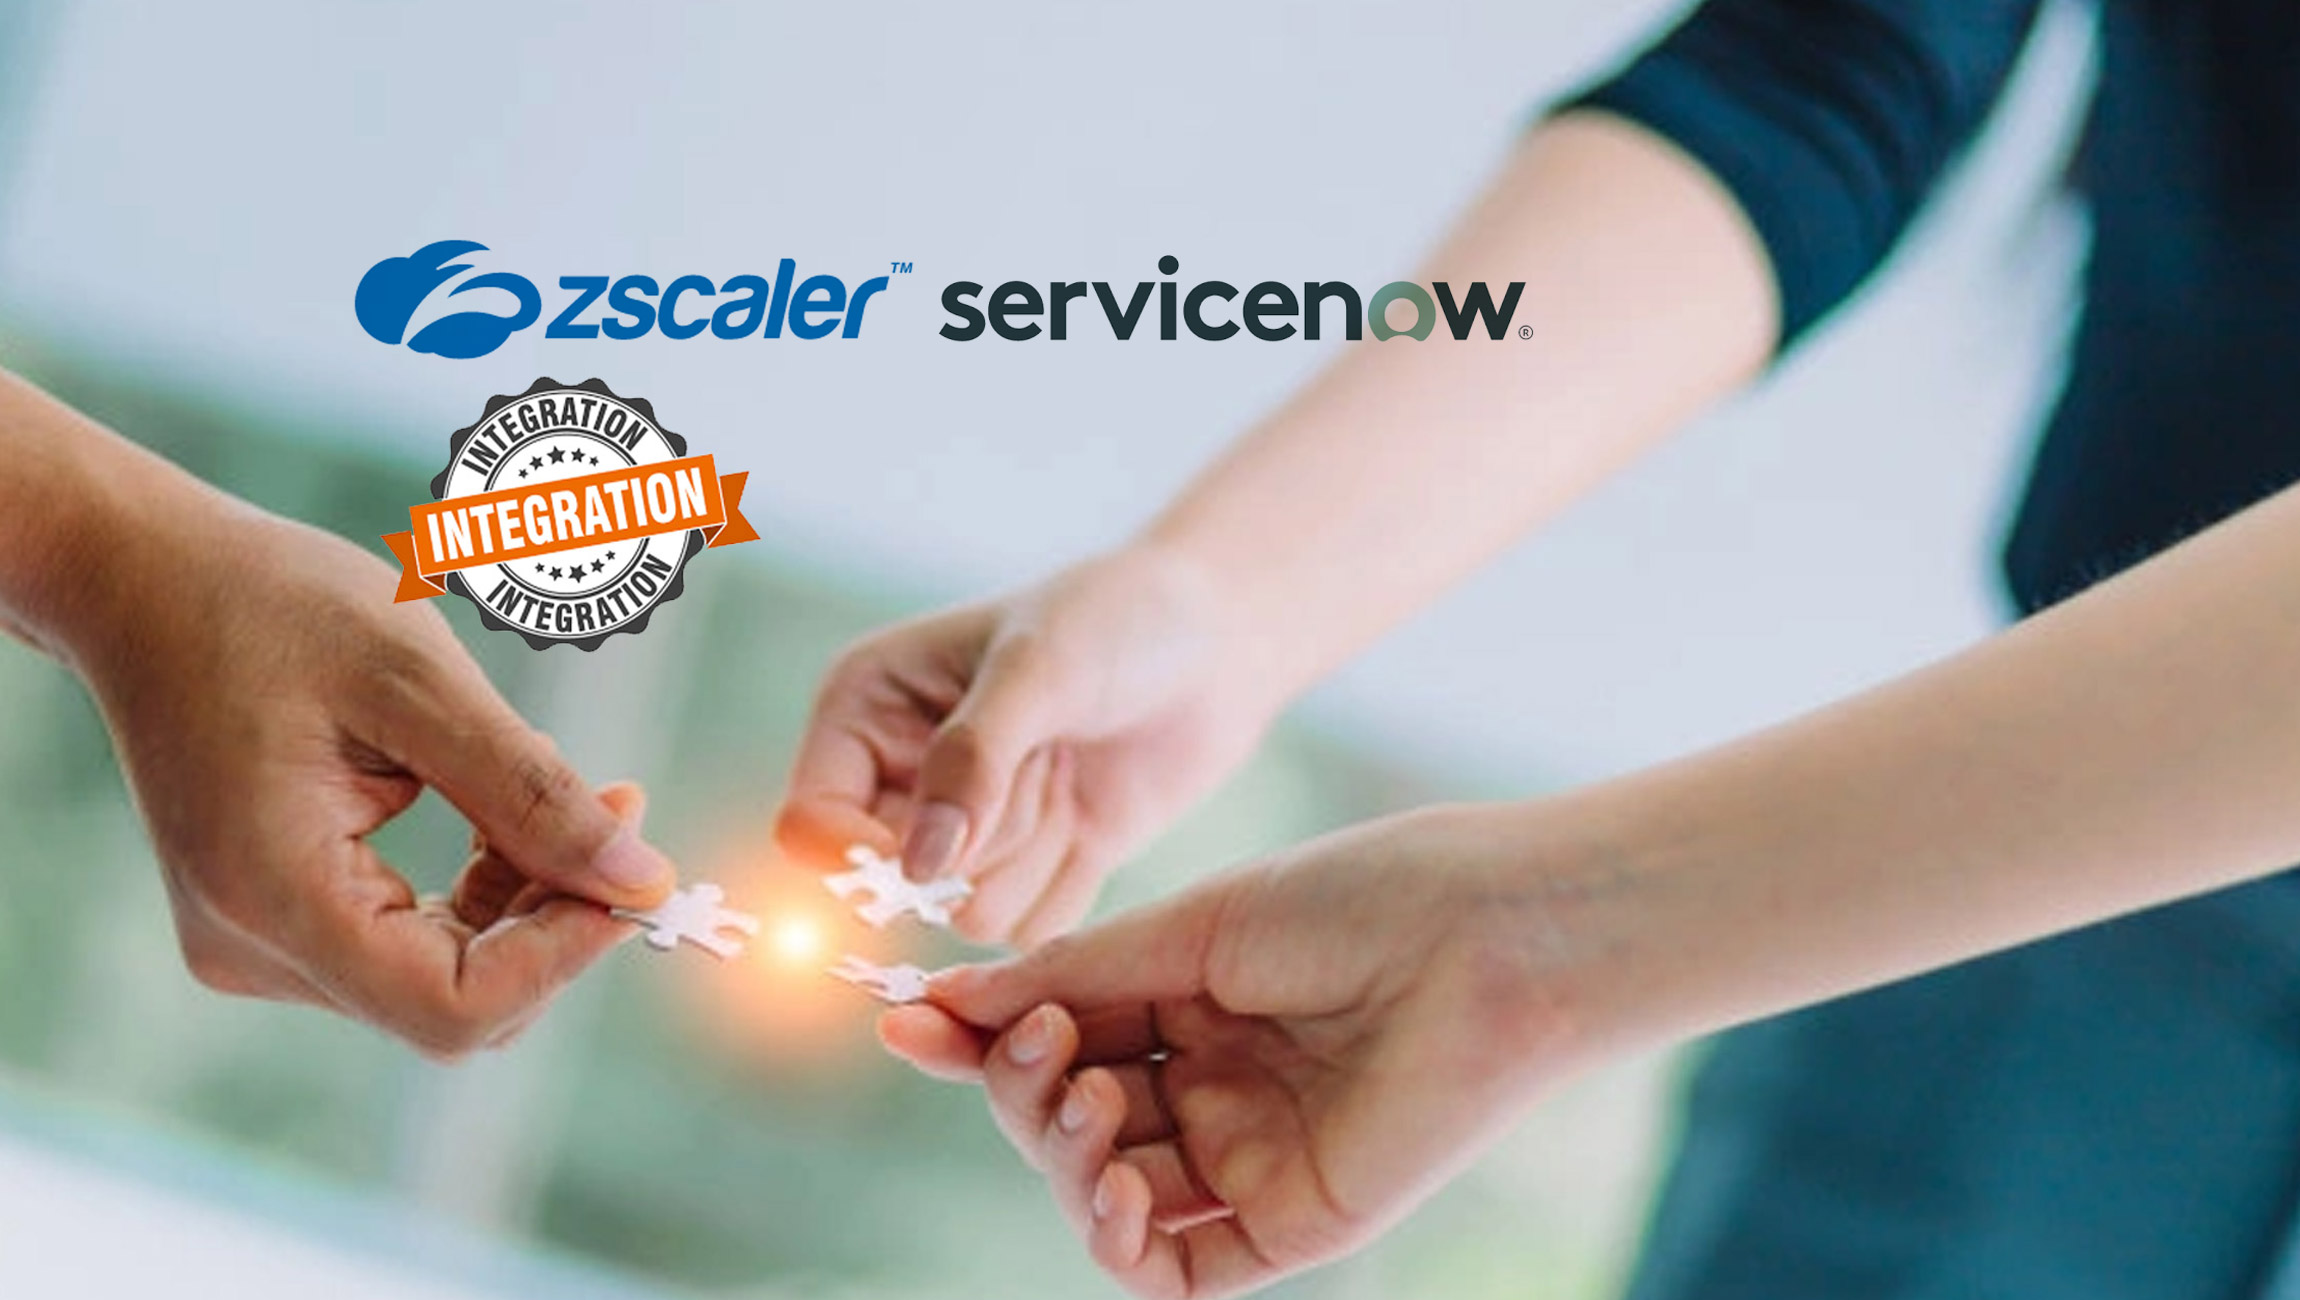 Zscaler and ServiceNow Integrate to Offer Enterprise Cloud Data Control and Fast Threat Detection and Response